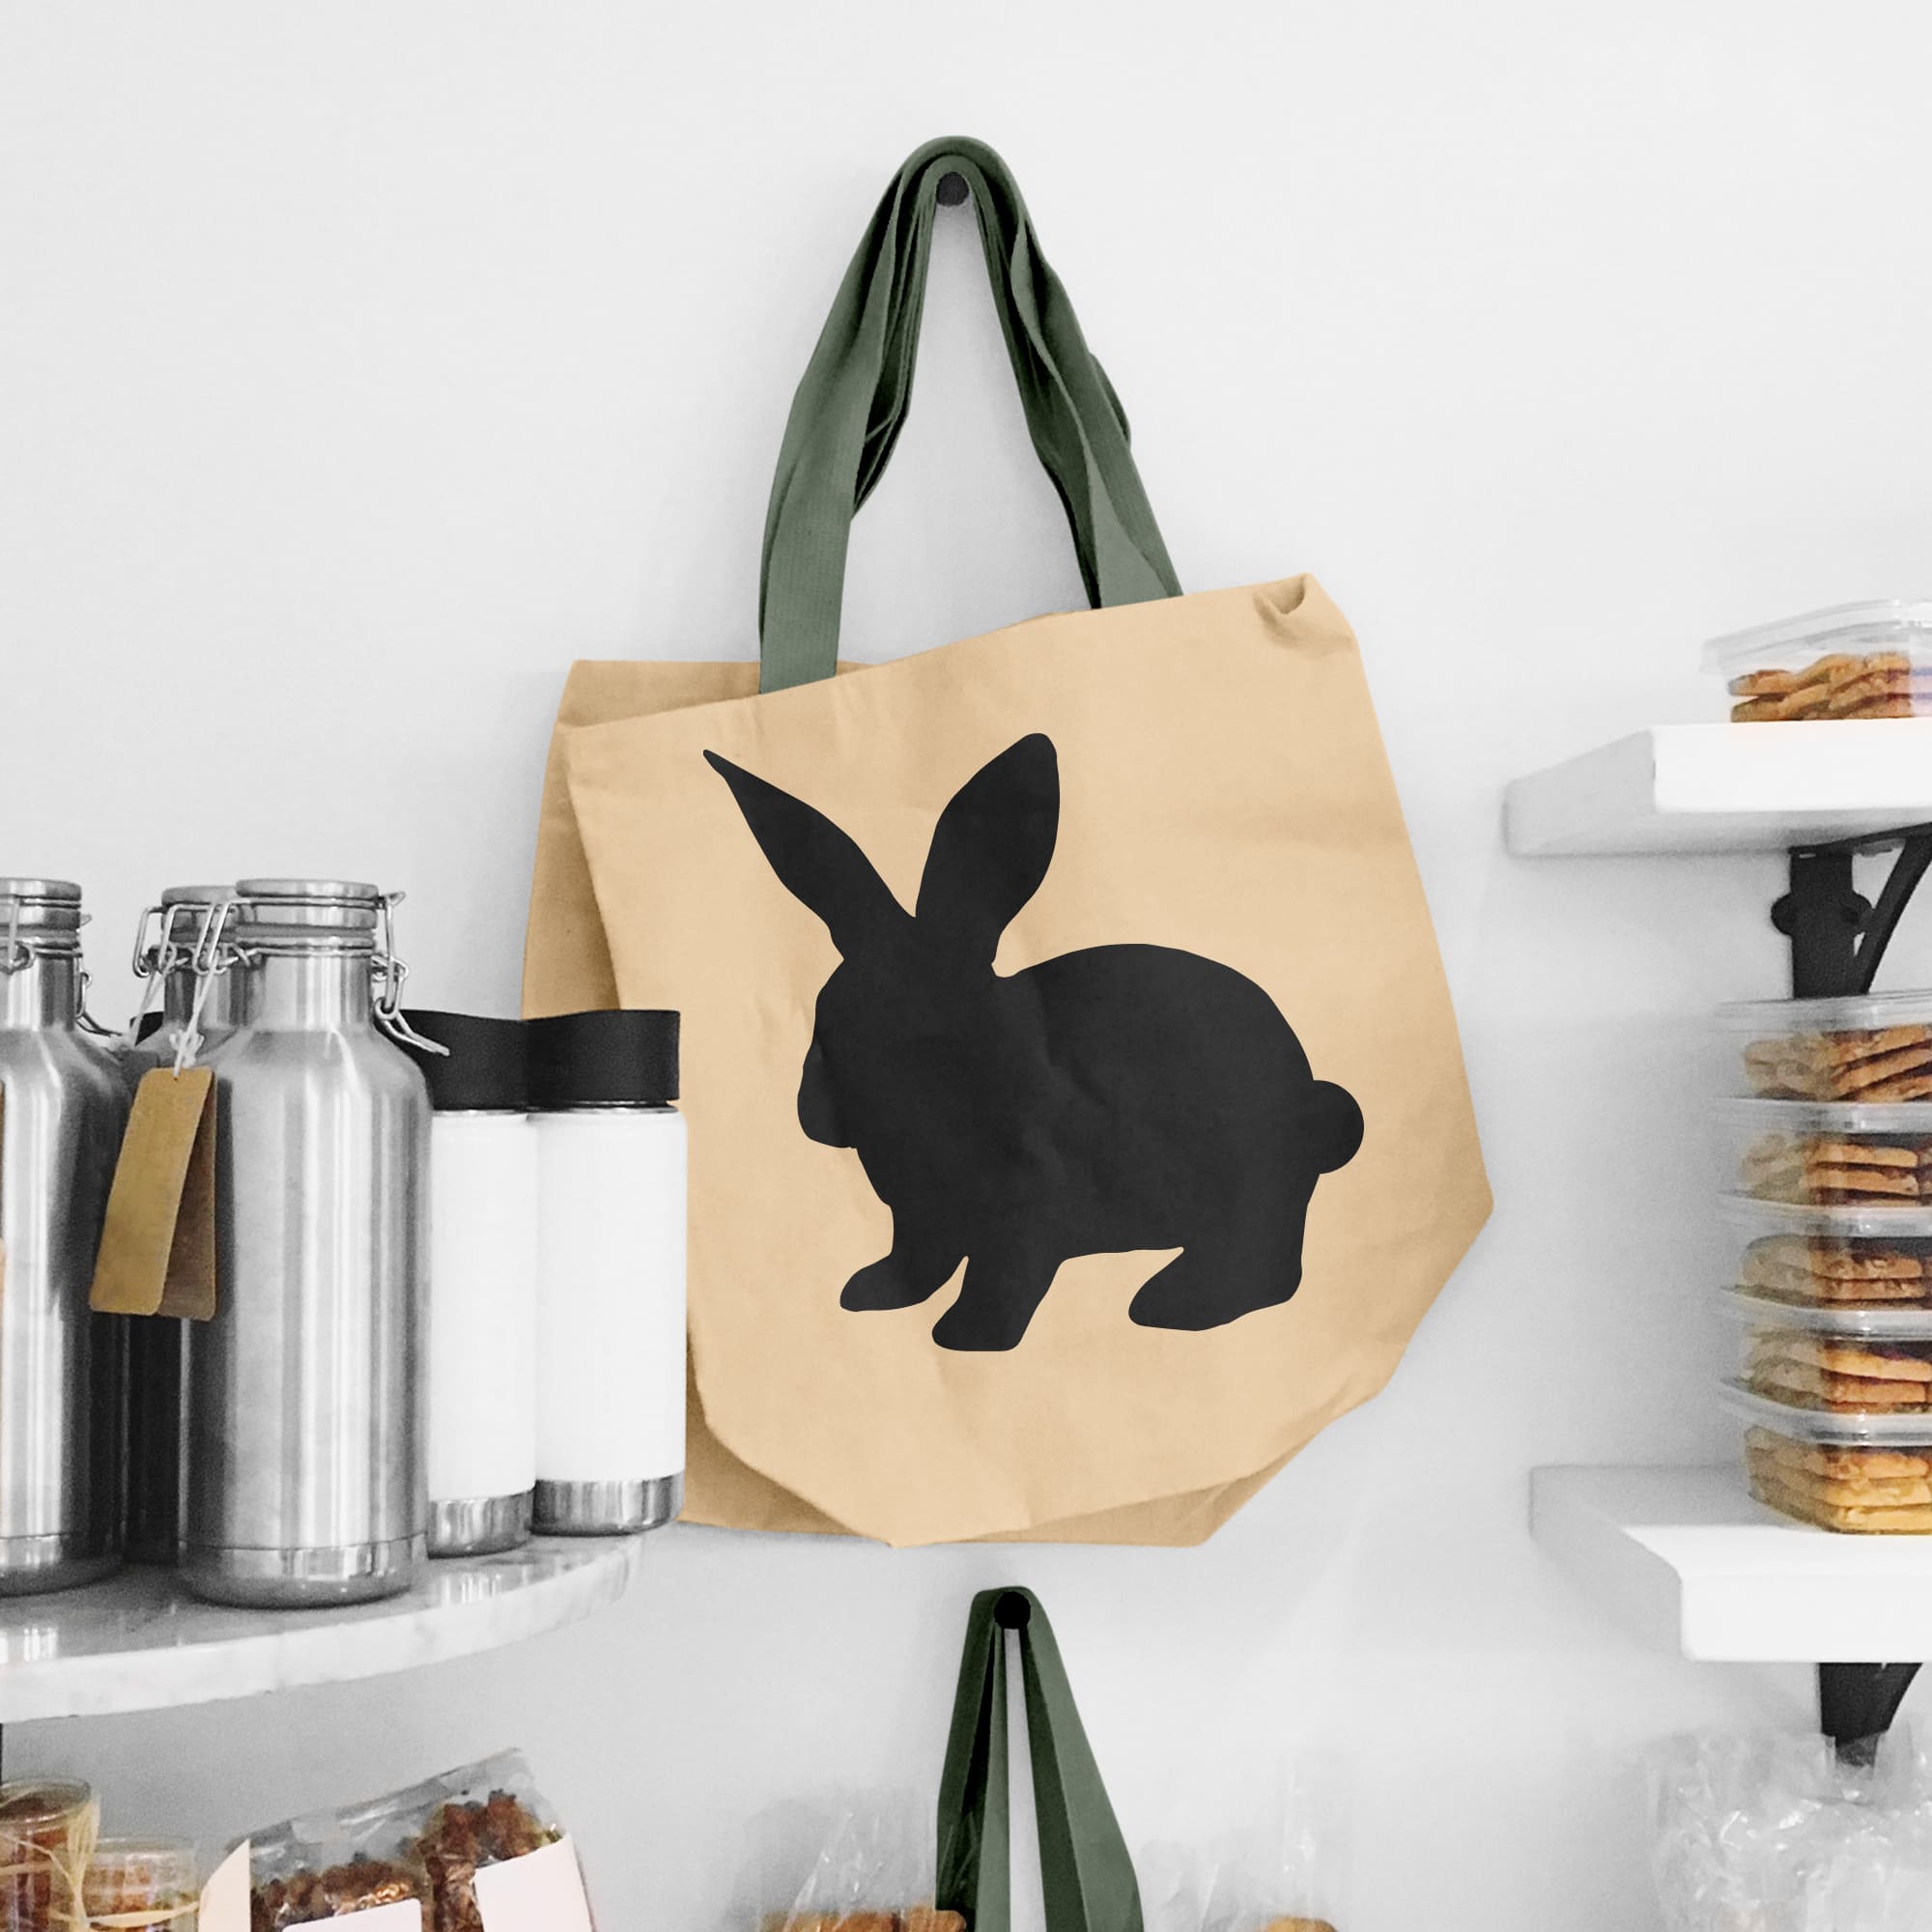 Brown bag with a black rabbit on it.